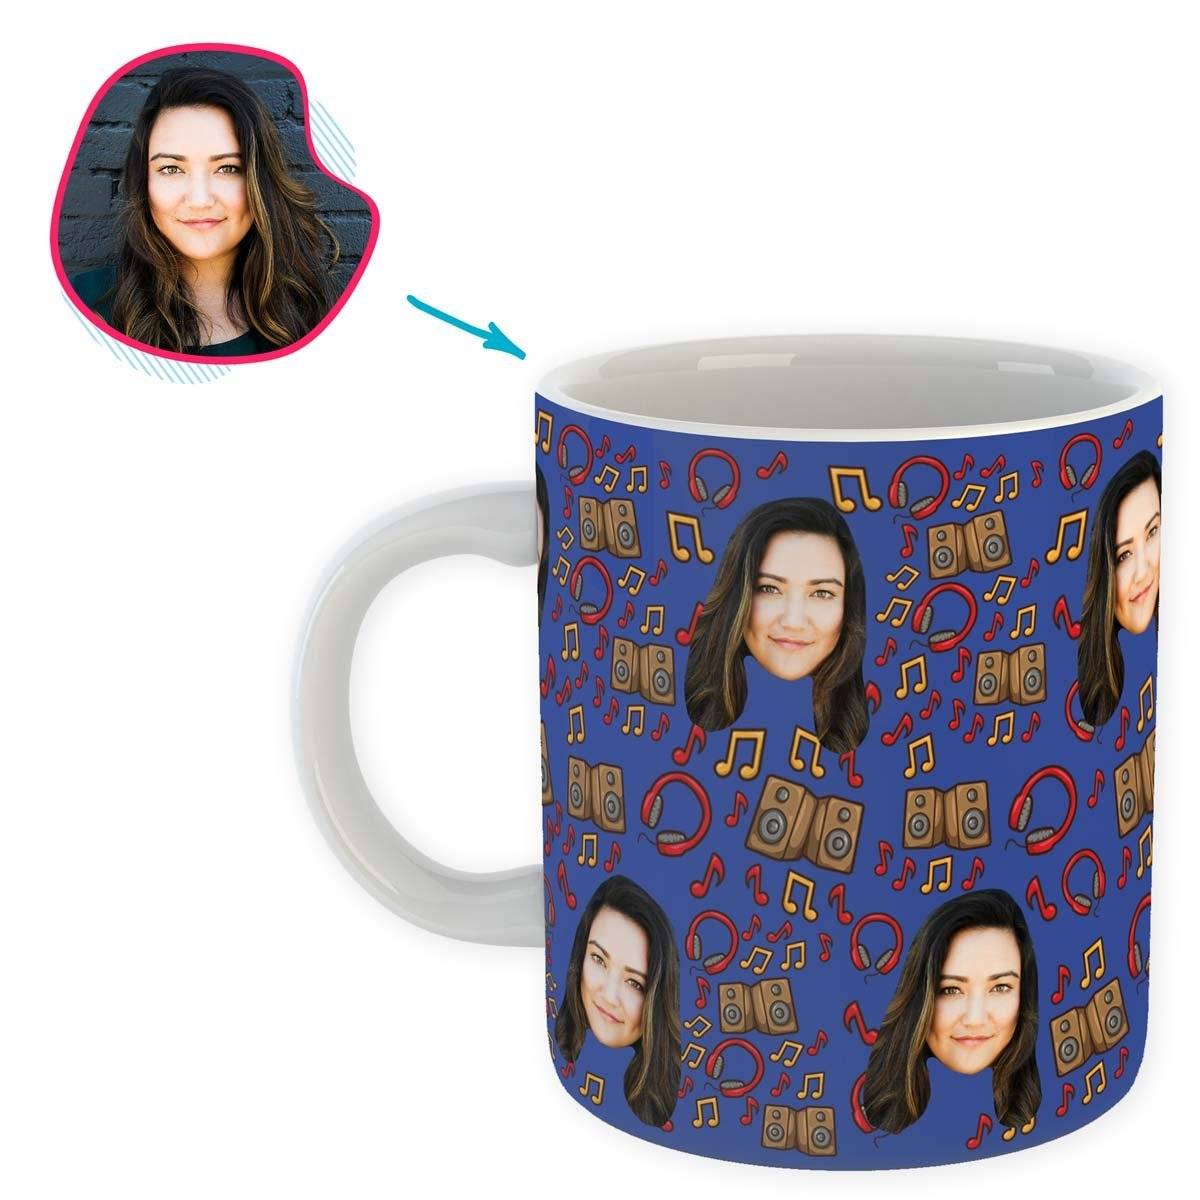 darkblue Music mug personalized with photo of face printed on it